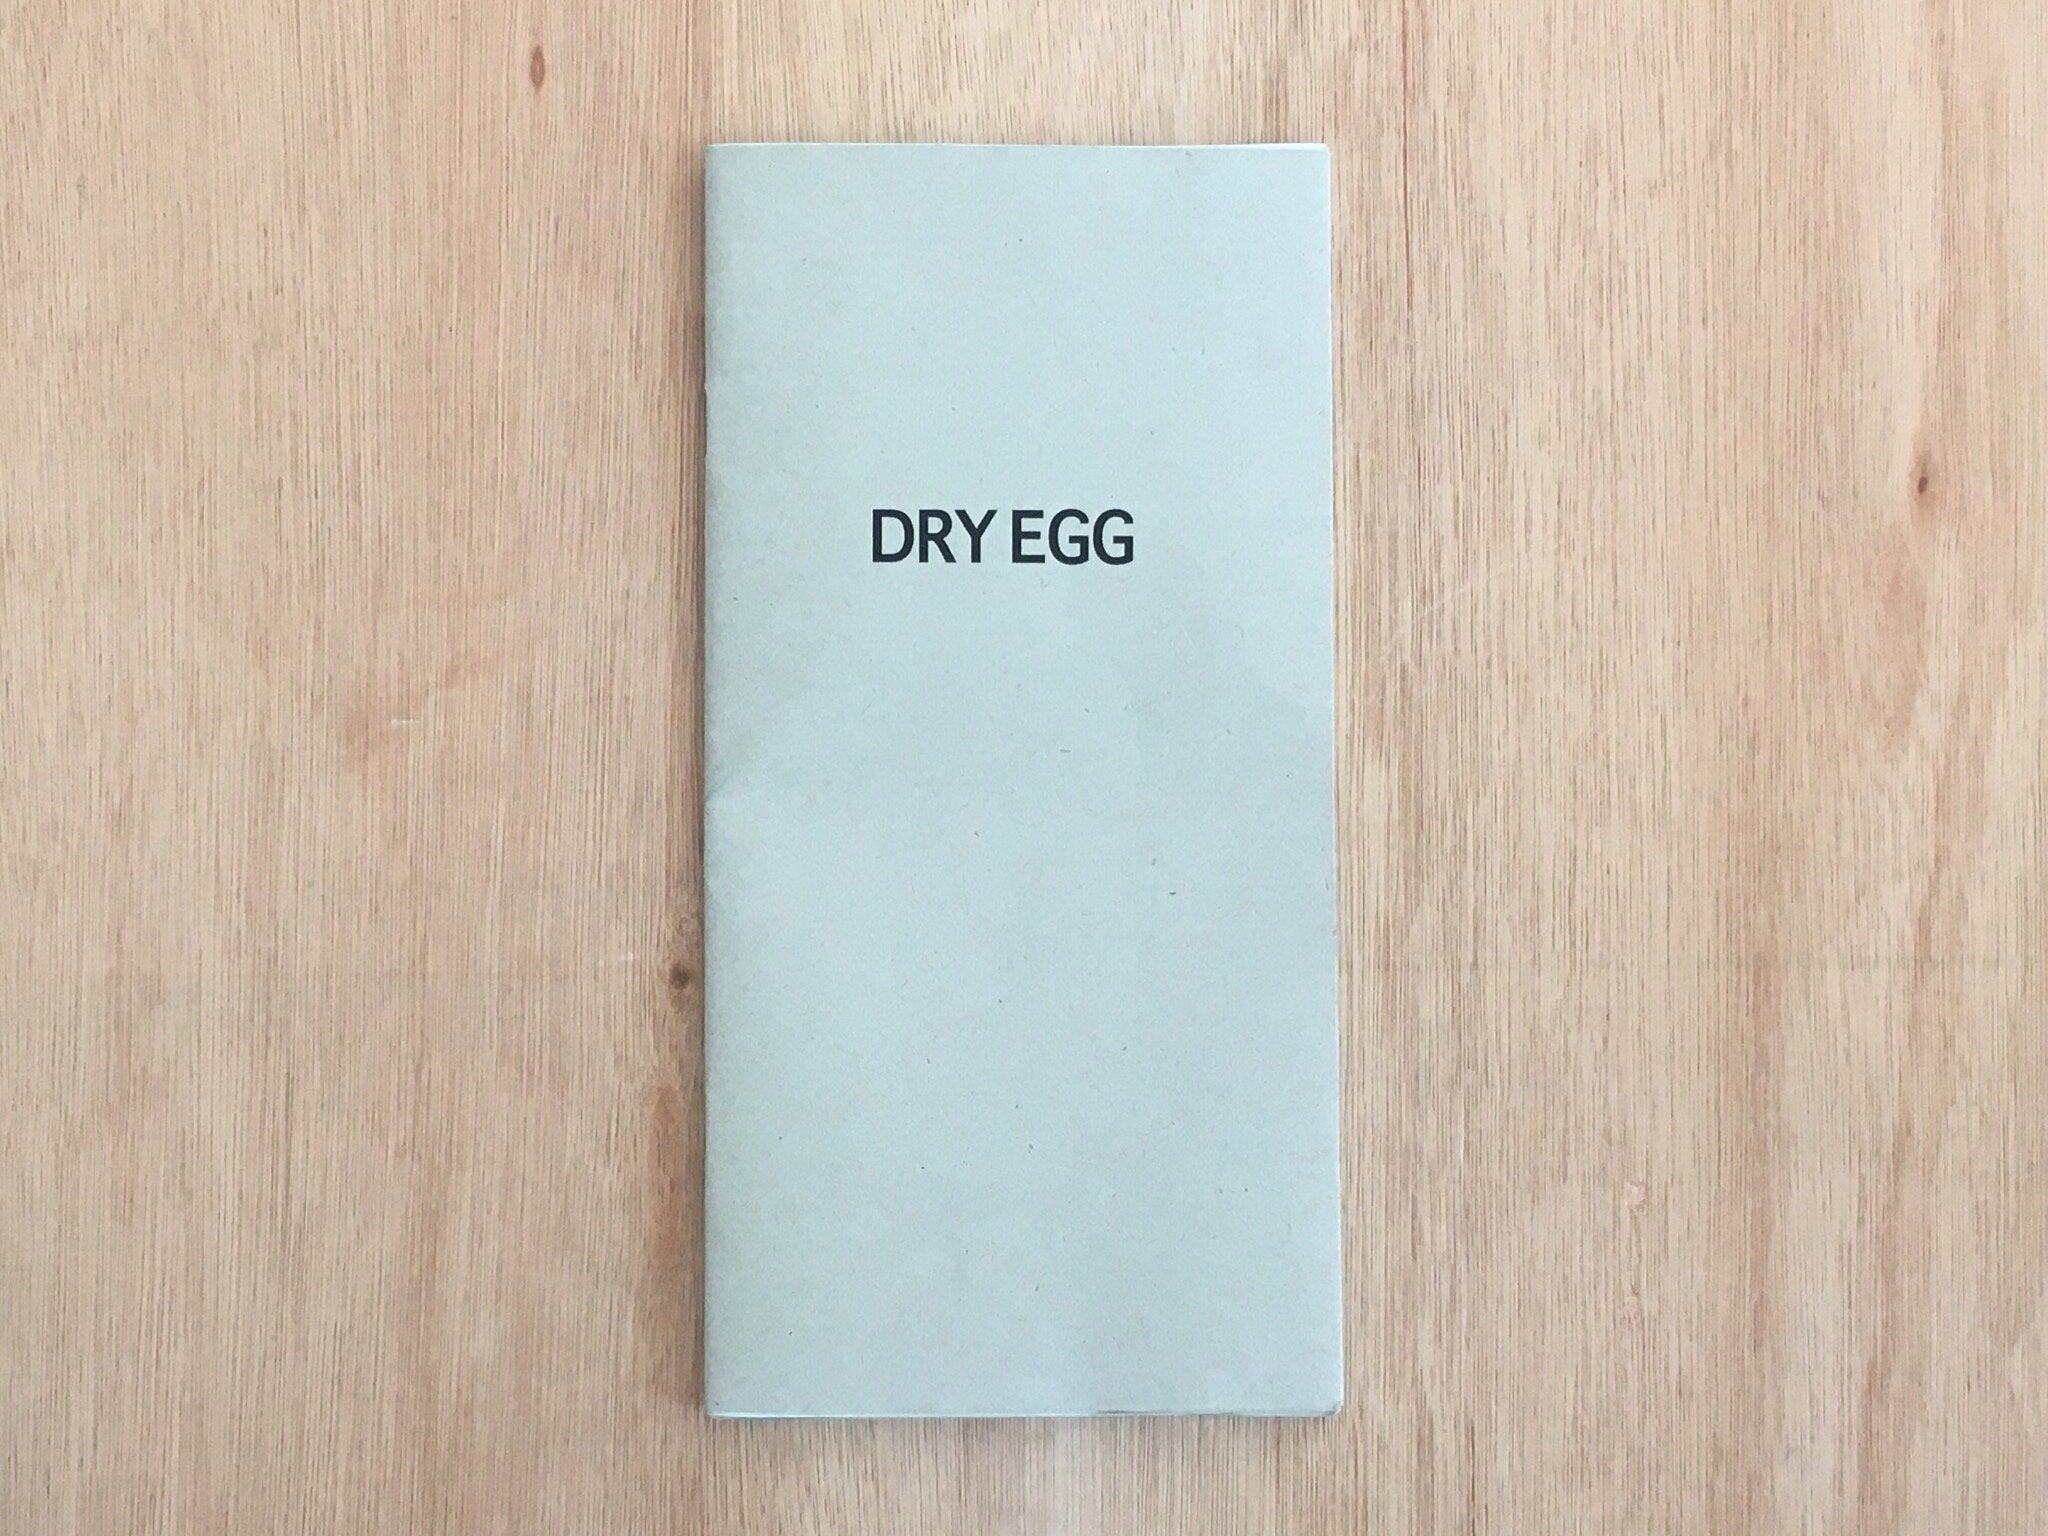 DRY EGG by Jamie McNeill